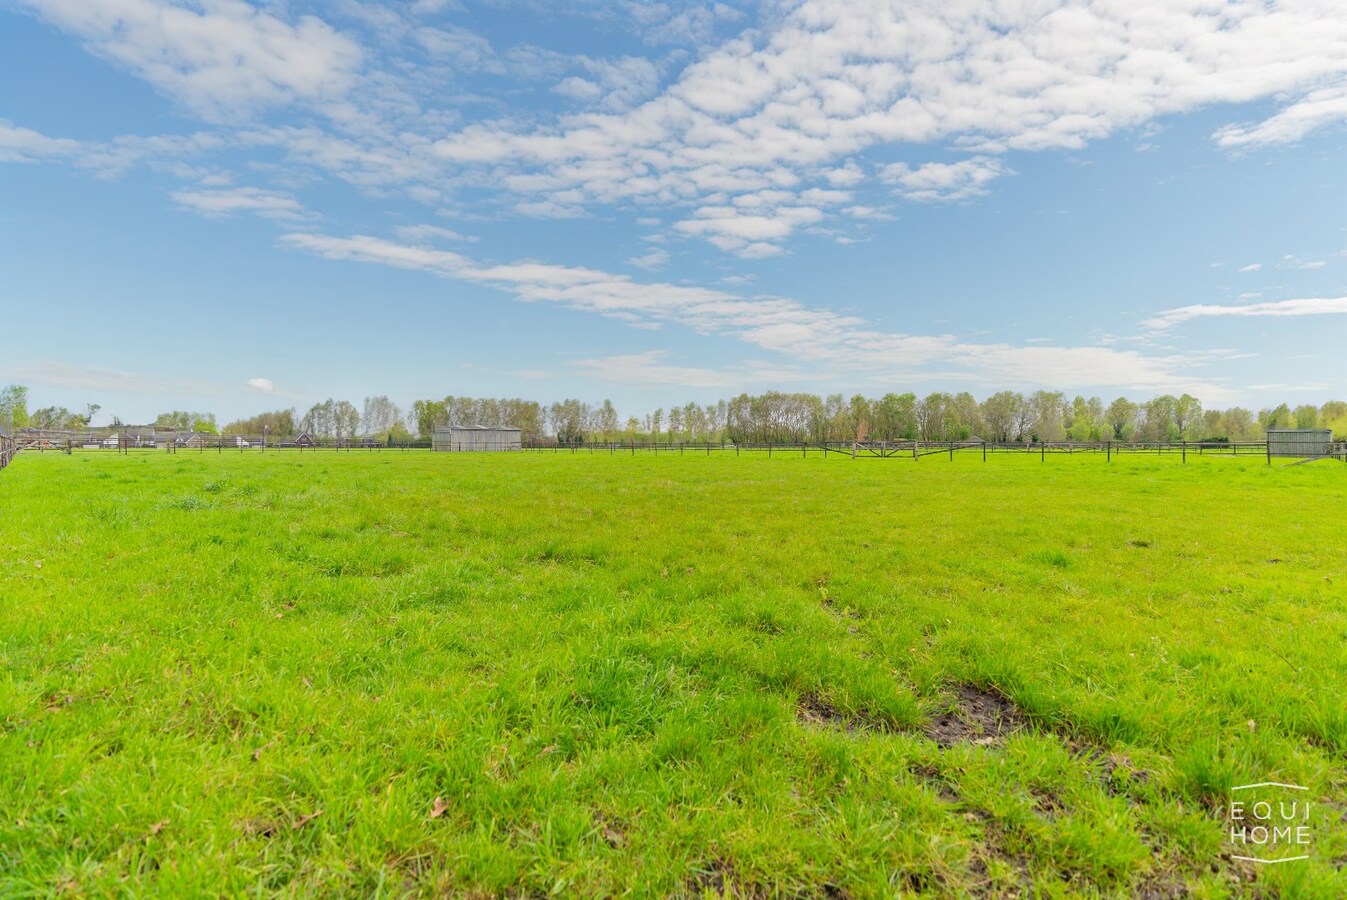 Meadow with shelters on 3.5 hectares in Hoogstraten 